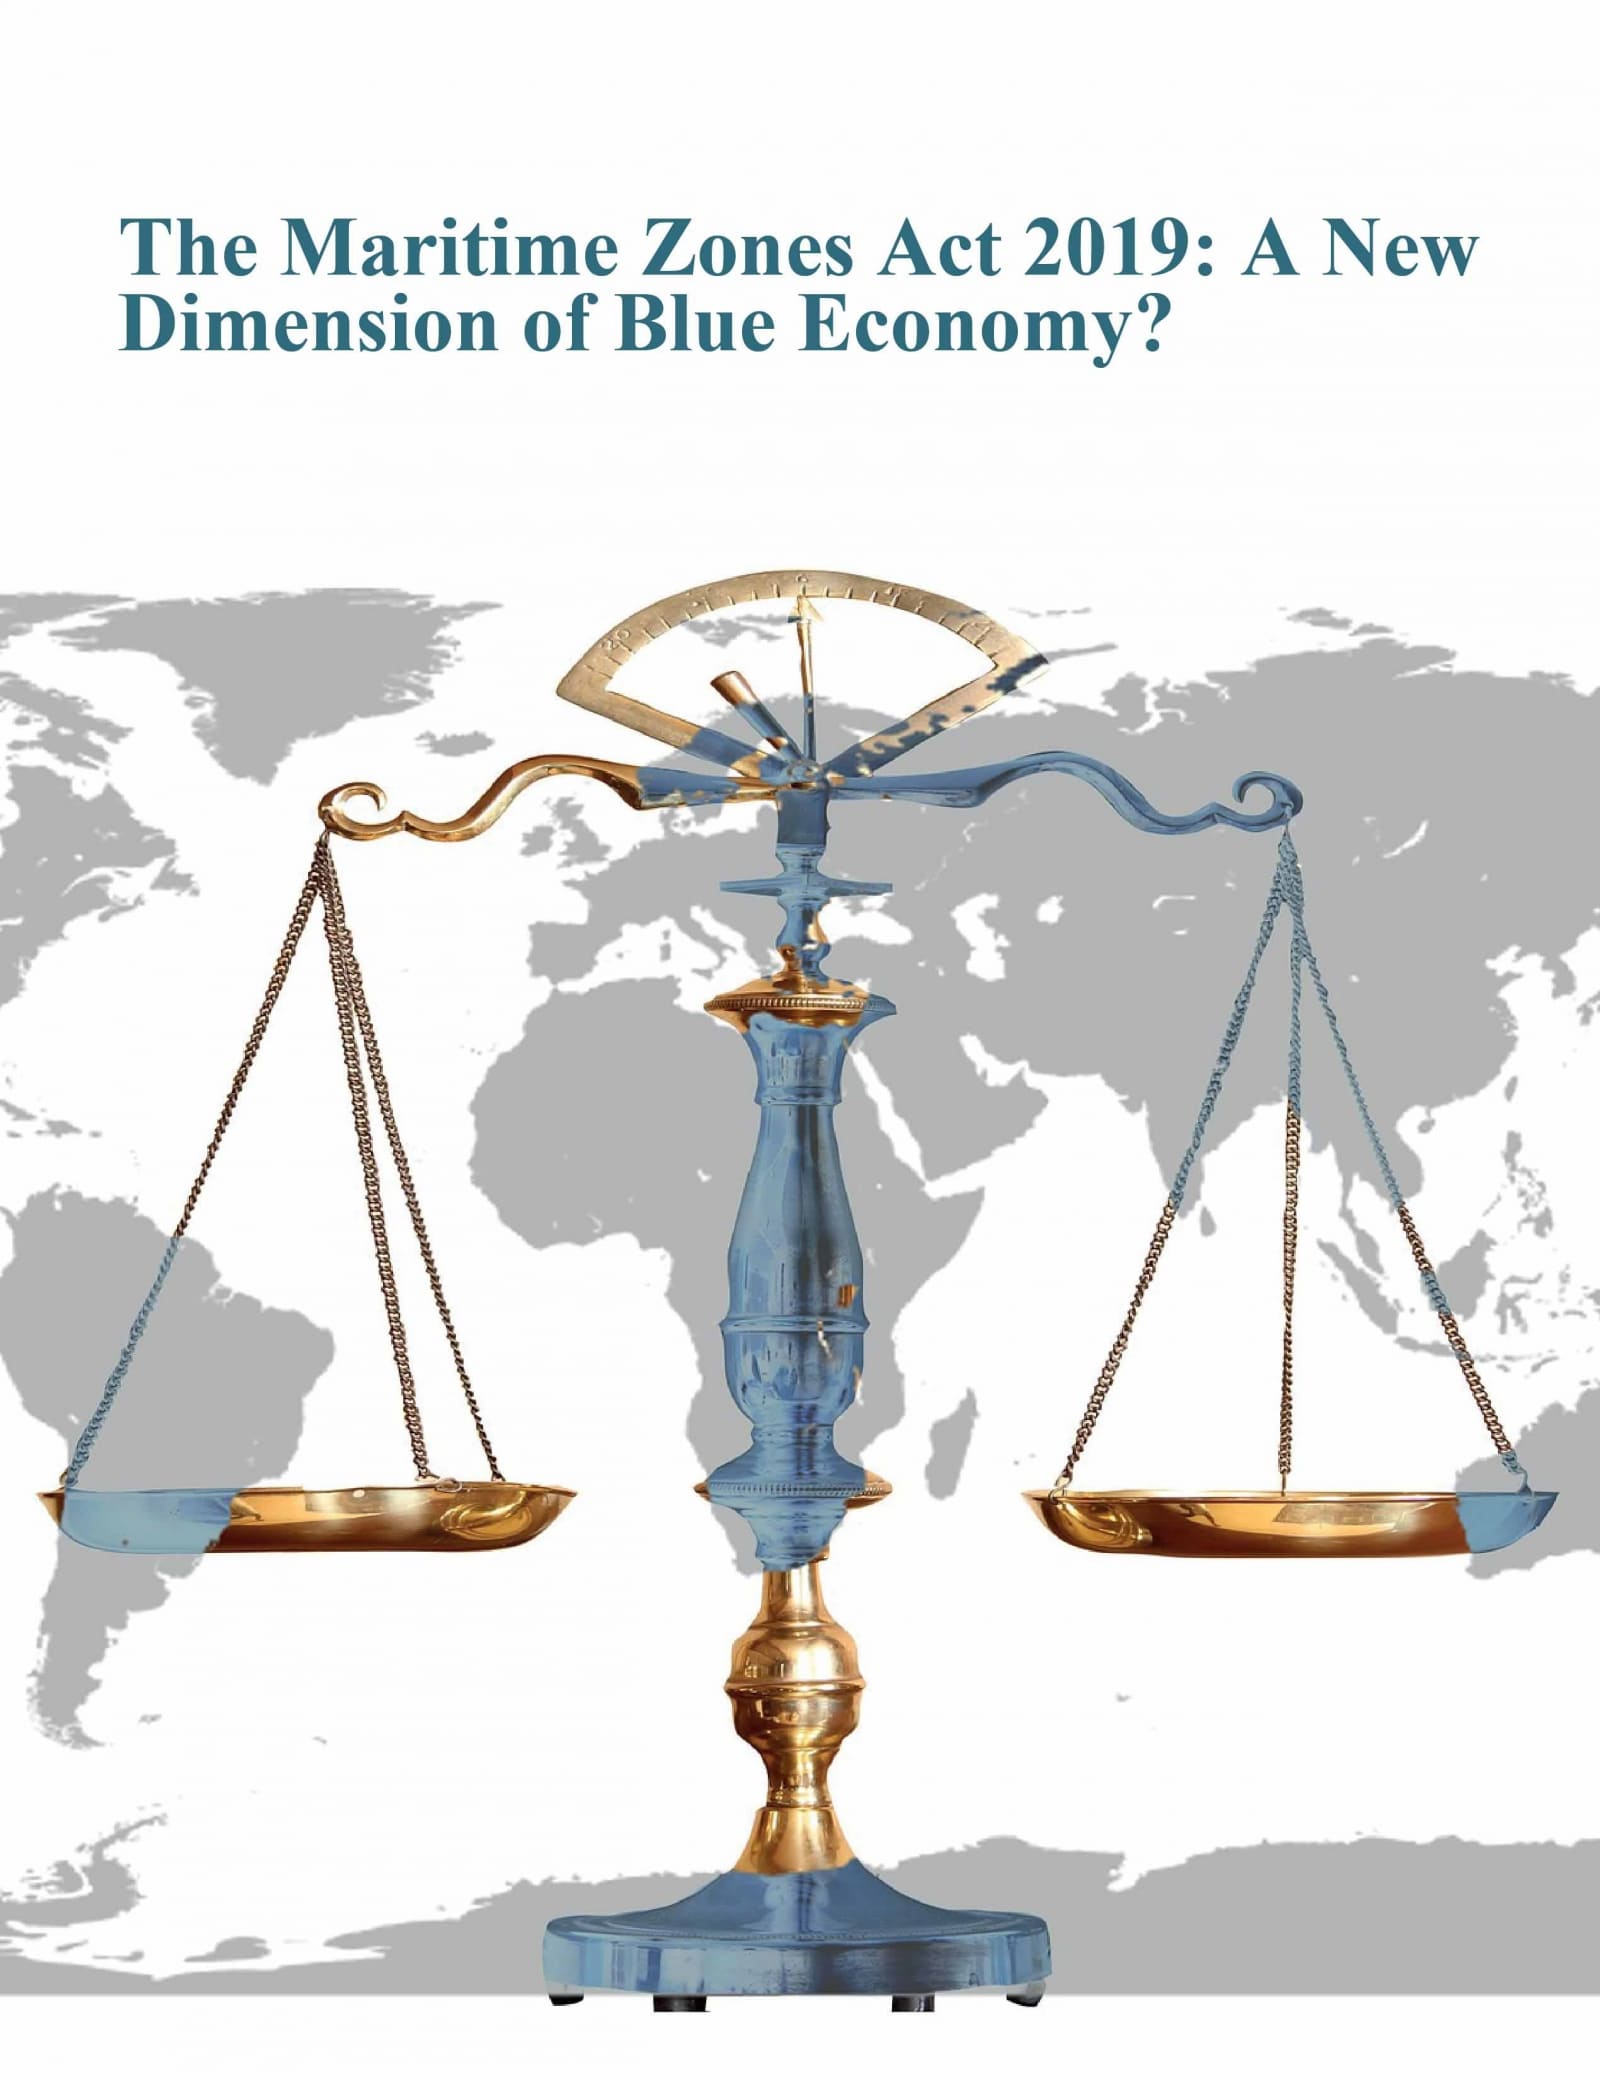 The Maritime Zones Act 2019: A New Dimension of Blue Economy?